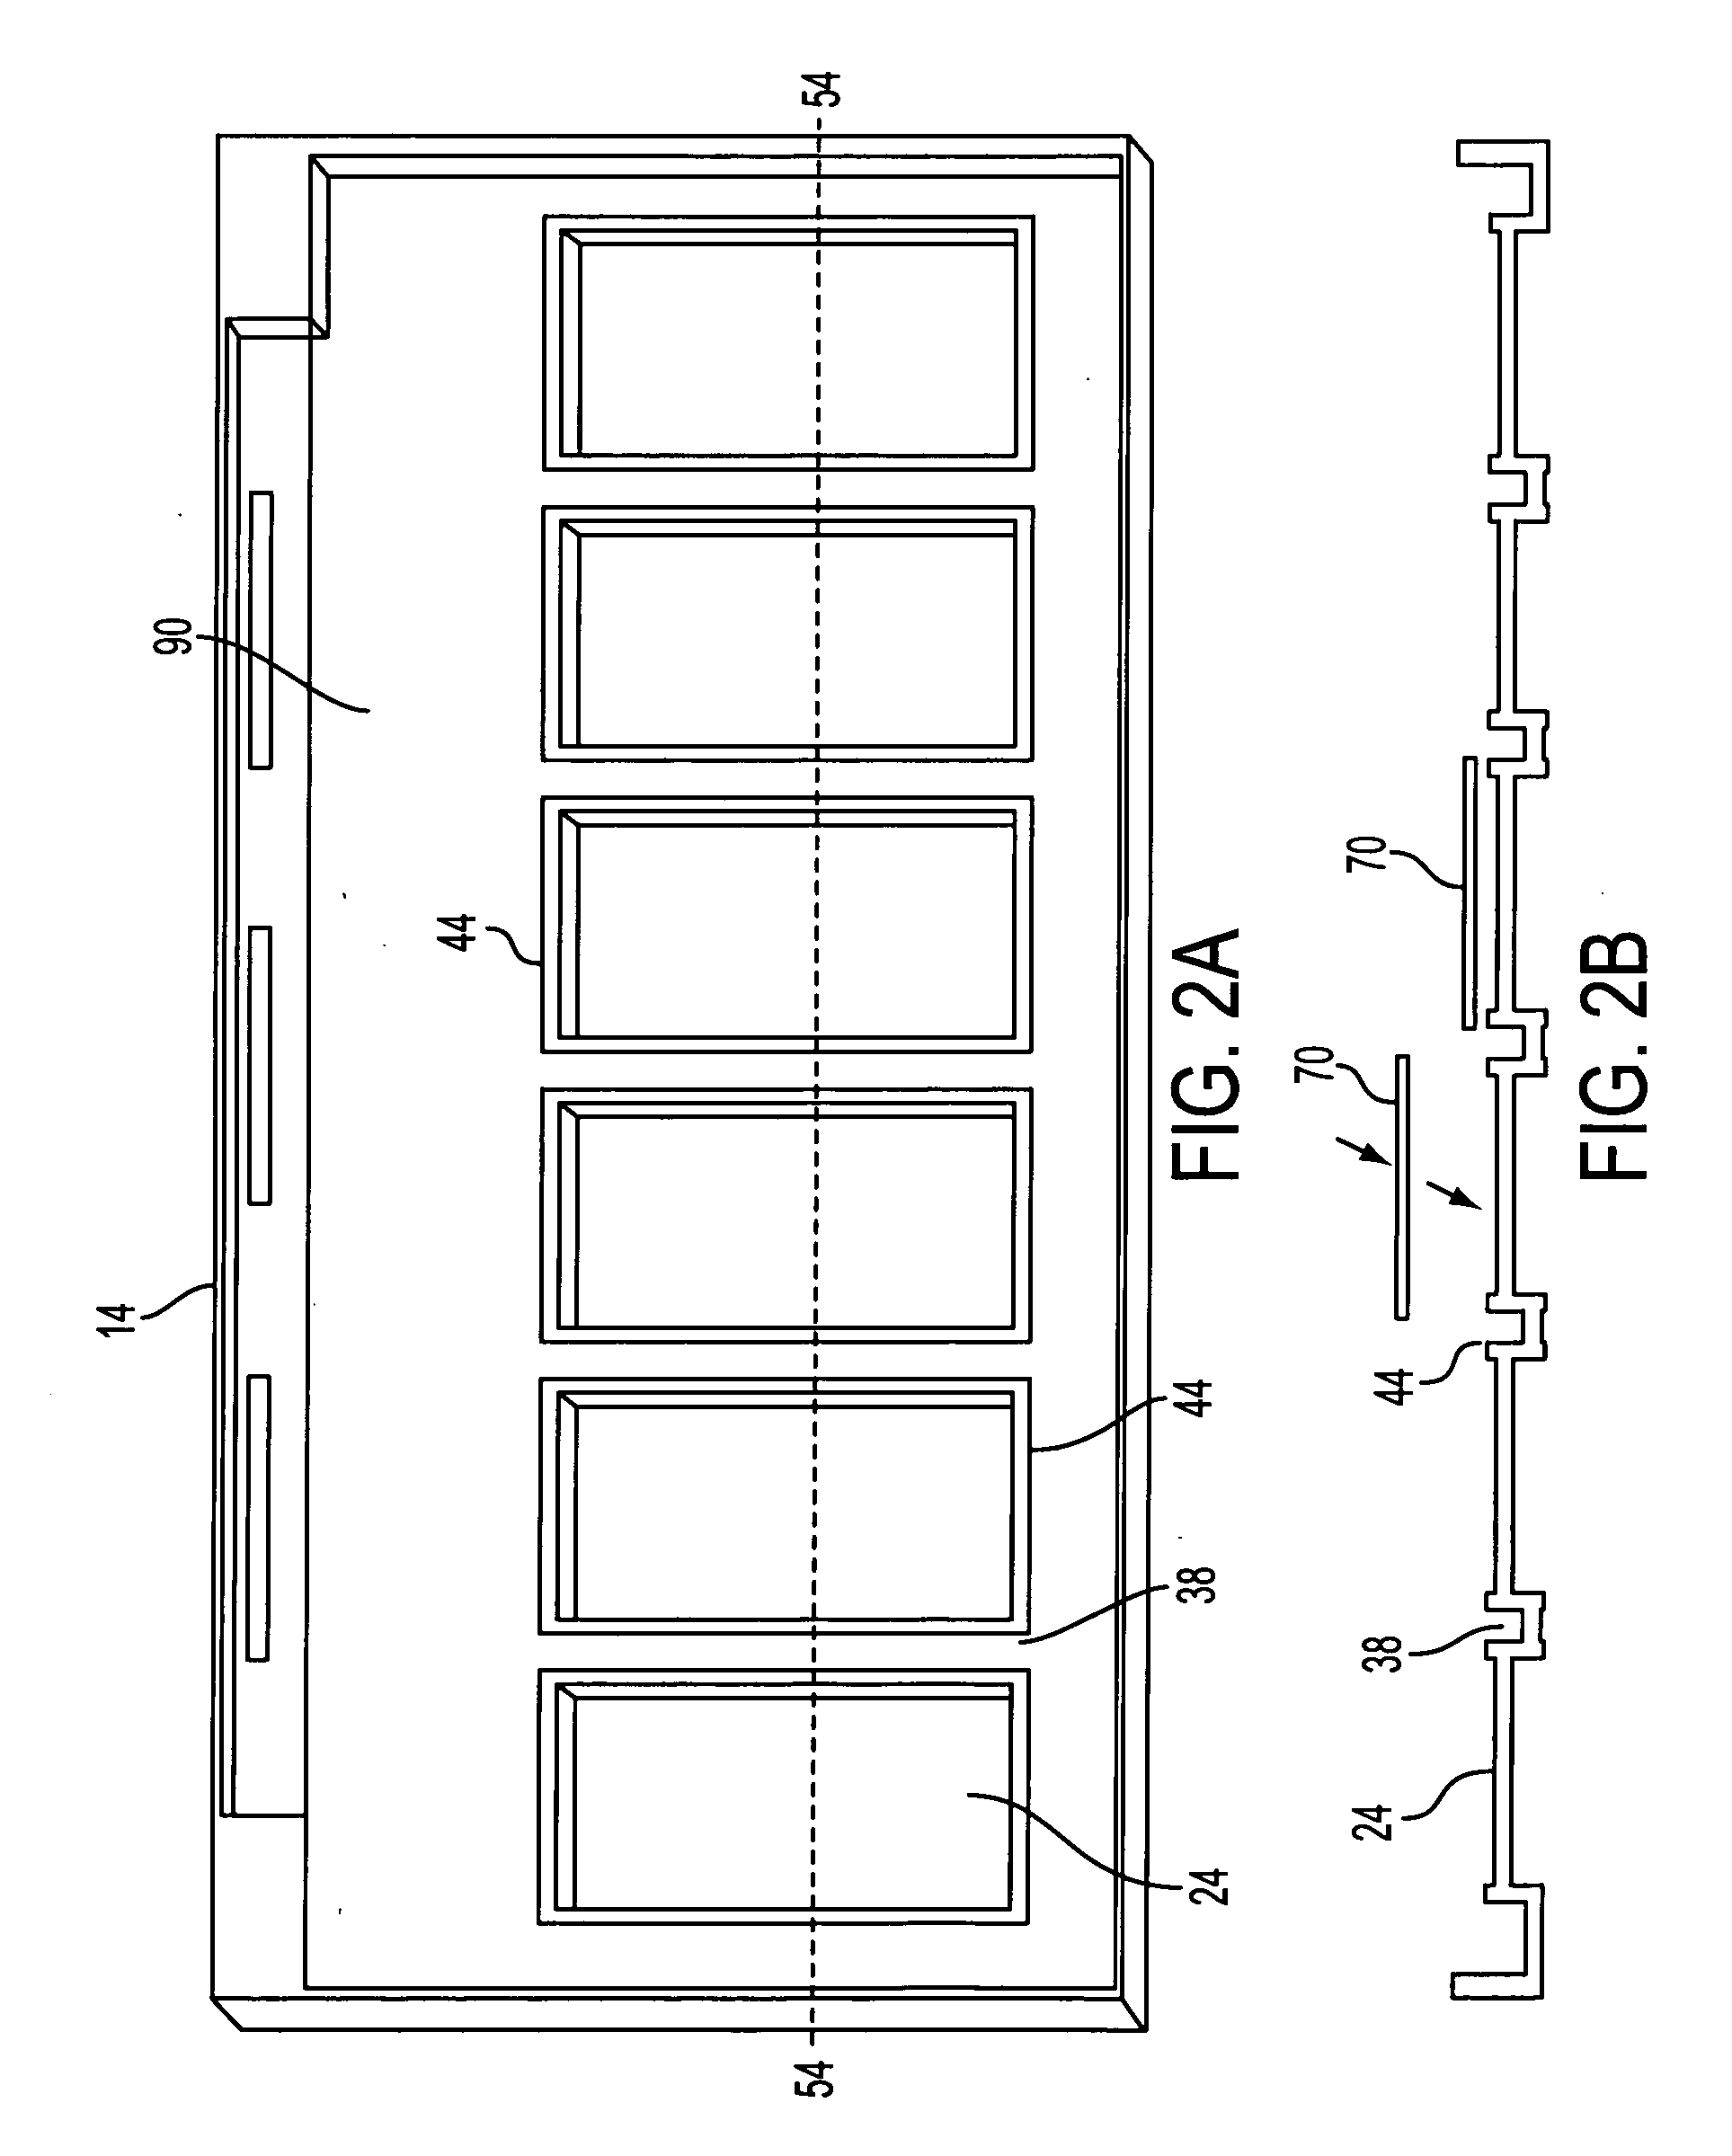 Apparatus and methods for efficient processing of biological samples on slides